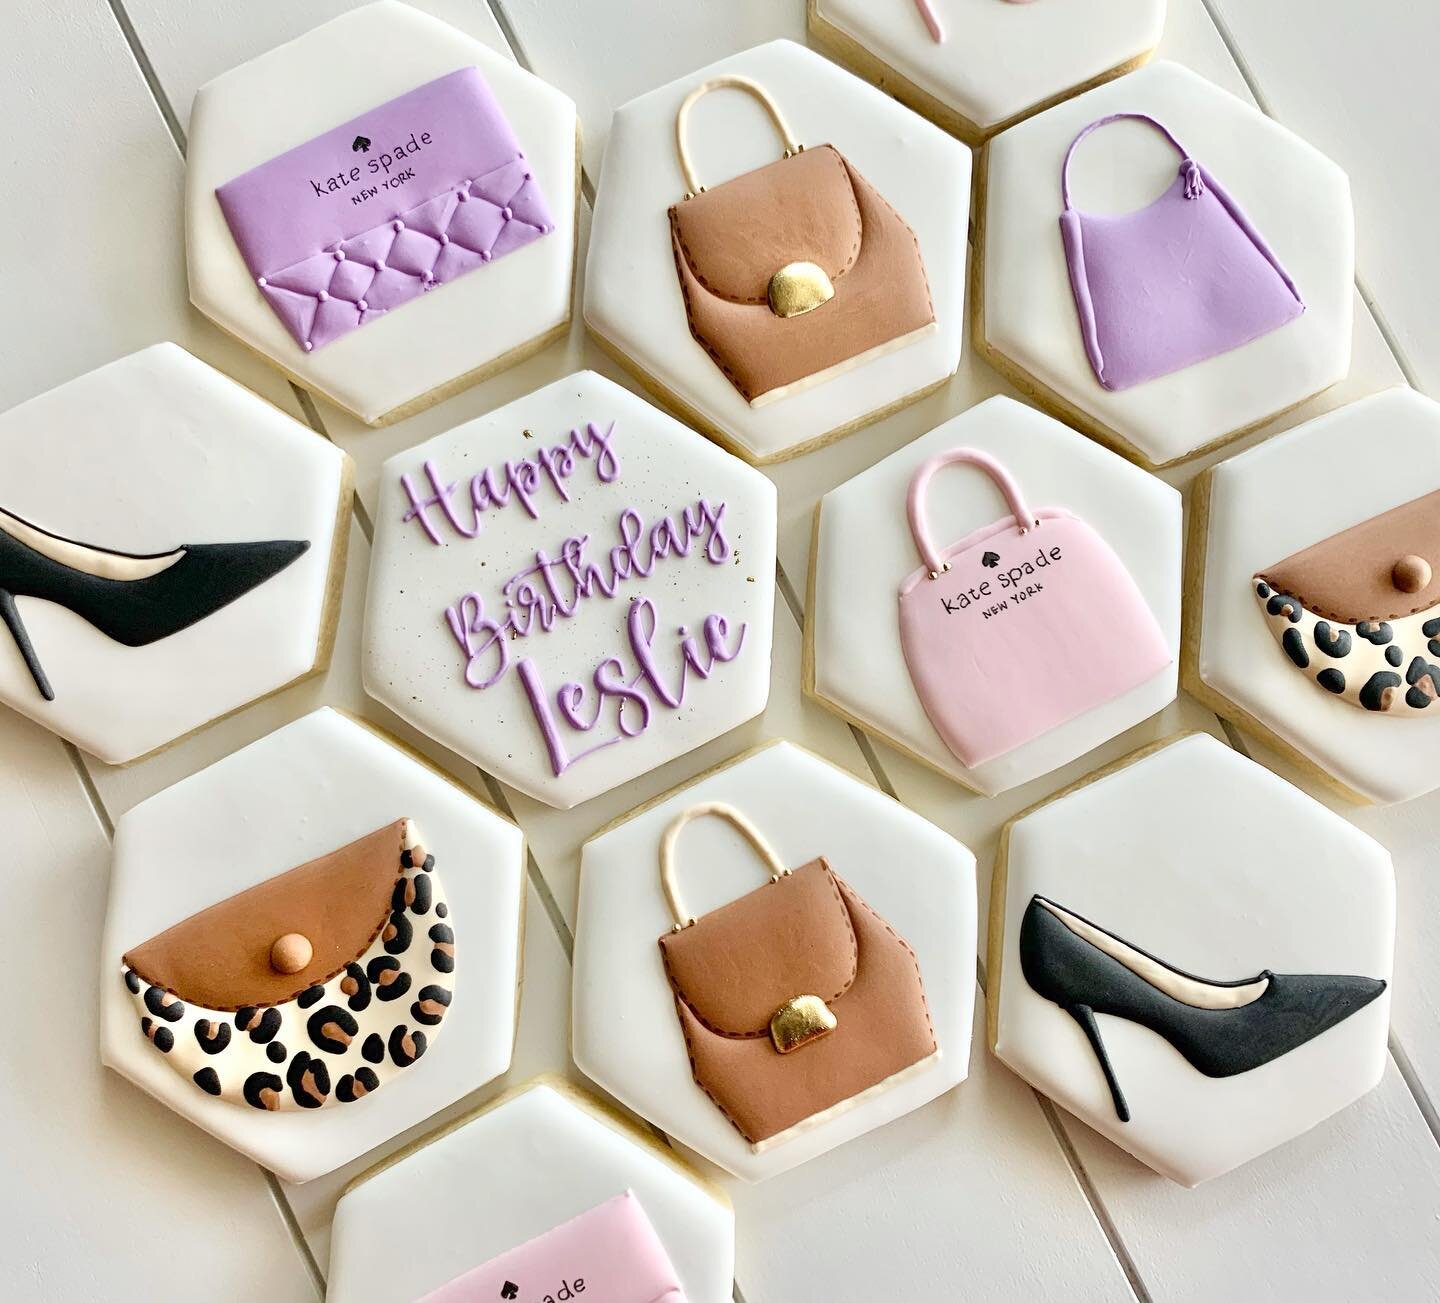 These cookies were ordered by a very sweet husband to surprise his wife who loves Kate Spade. ❤️❤️
.
.
.
#katespade #katespadecookies #birthdaycookies #fashioncookies #sugarcookies #tampacookies #tampasugarcookies #tampabaker #tampa #happybirthday